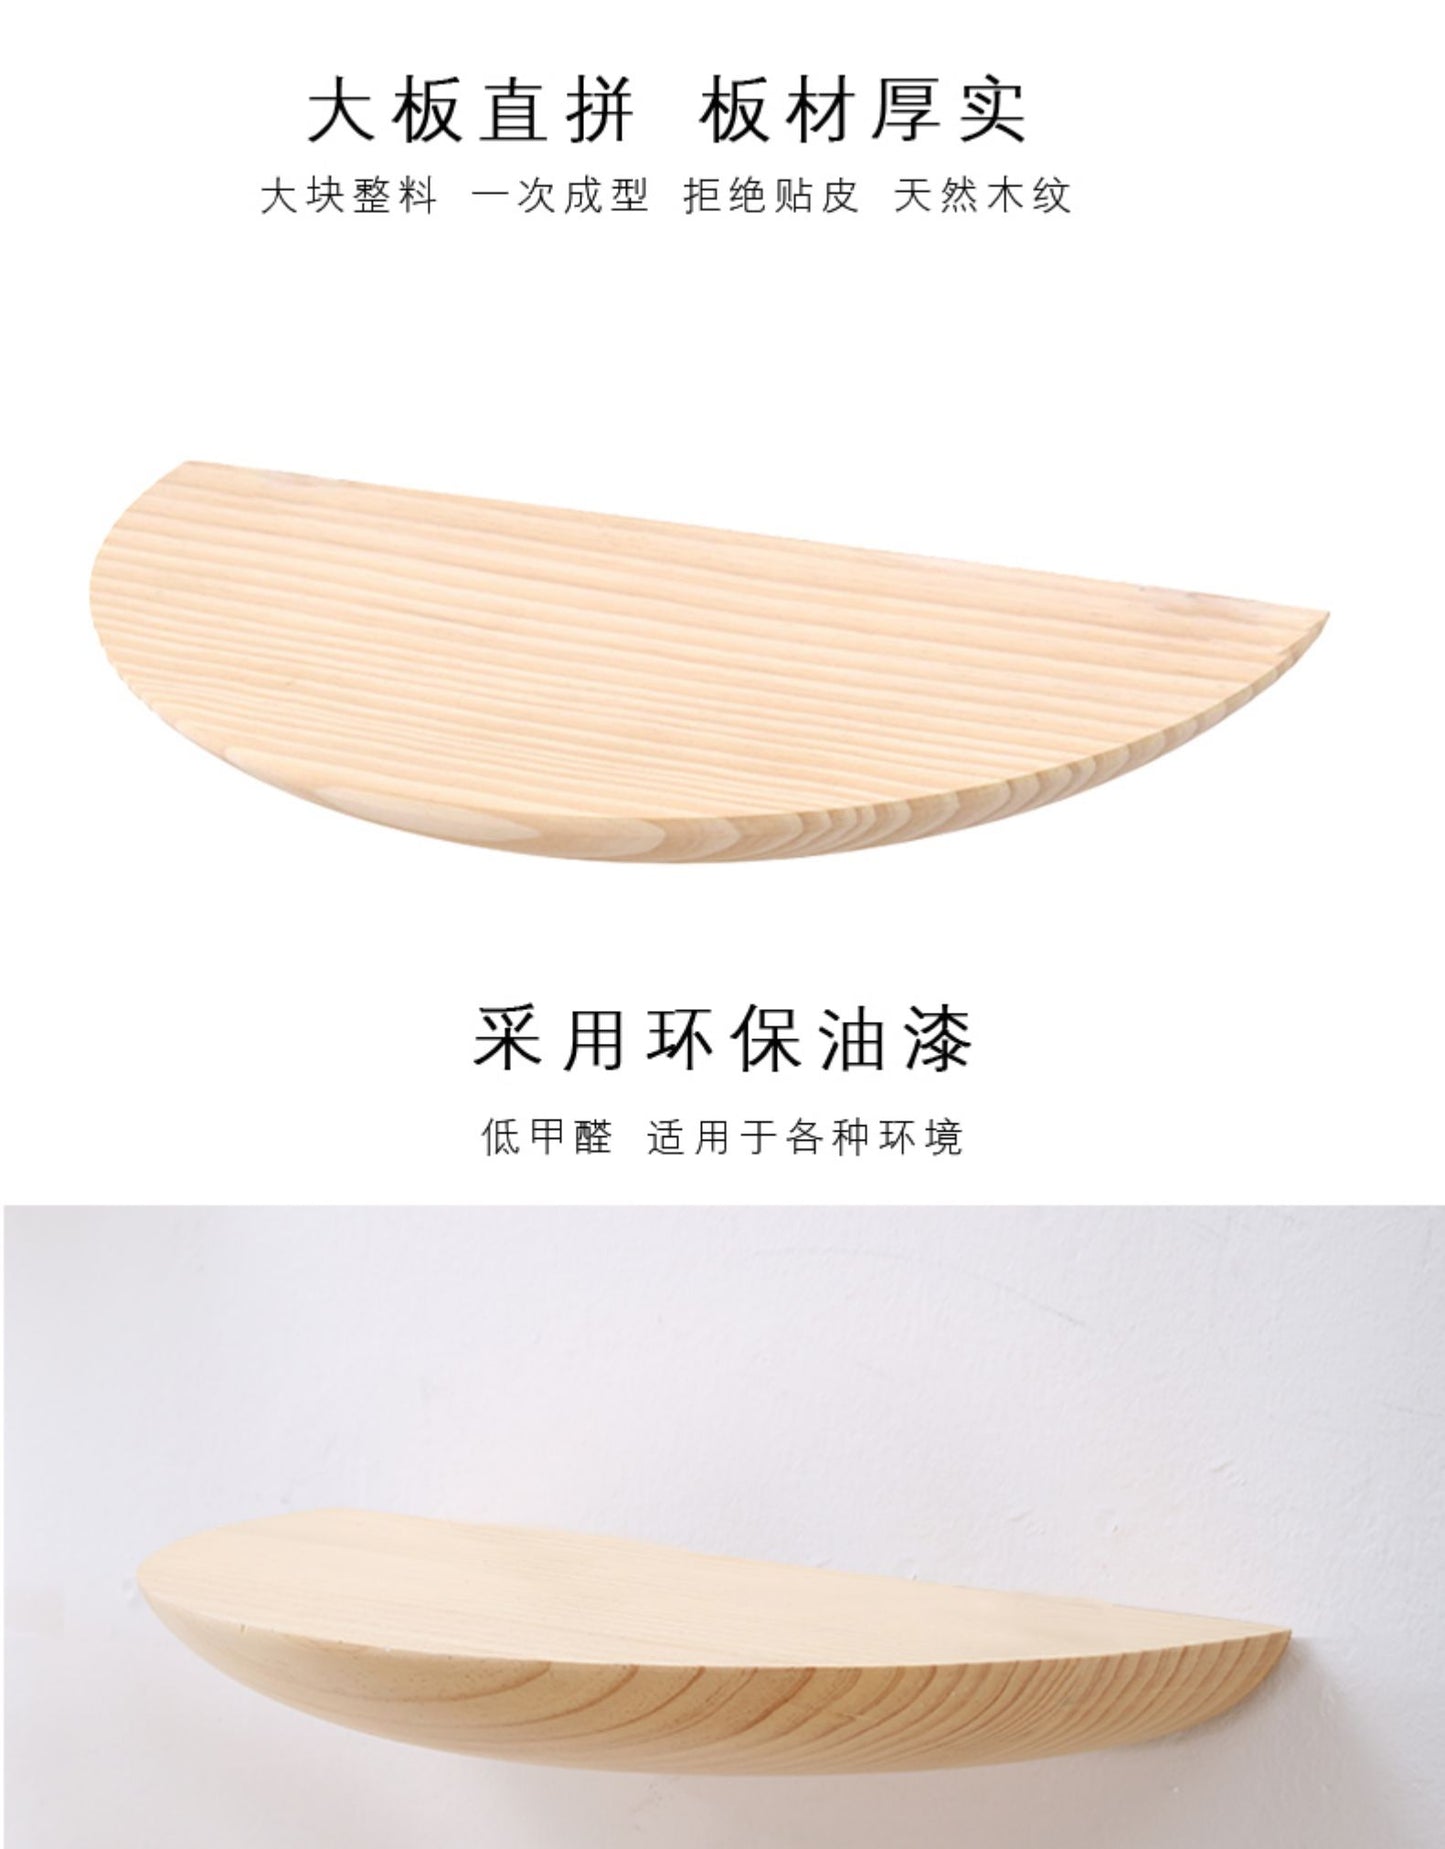 Wooden Semicircle Wall Shelf Background Wall Hanging Projector Display Stand Storage Organization Suspension Home Decoration